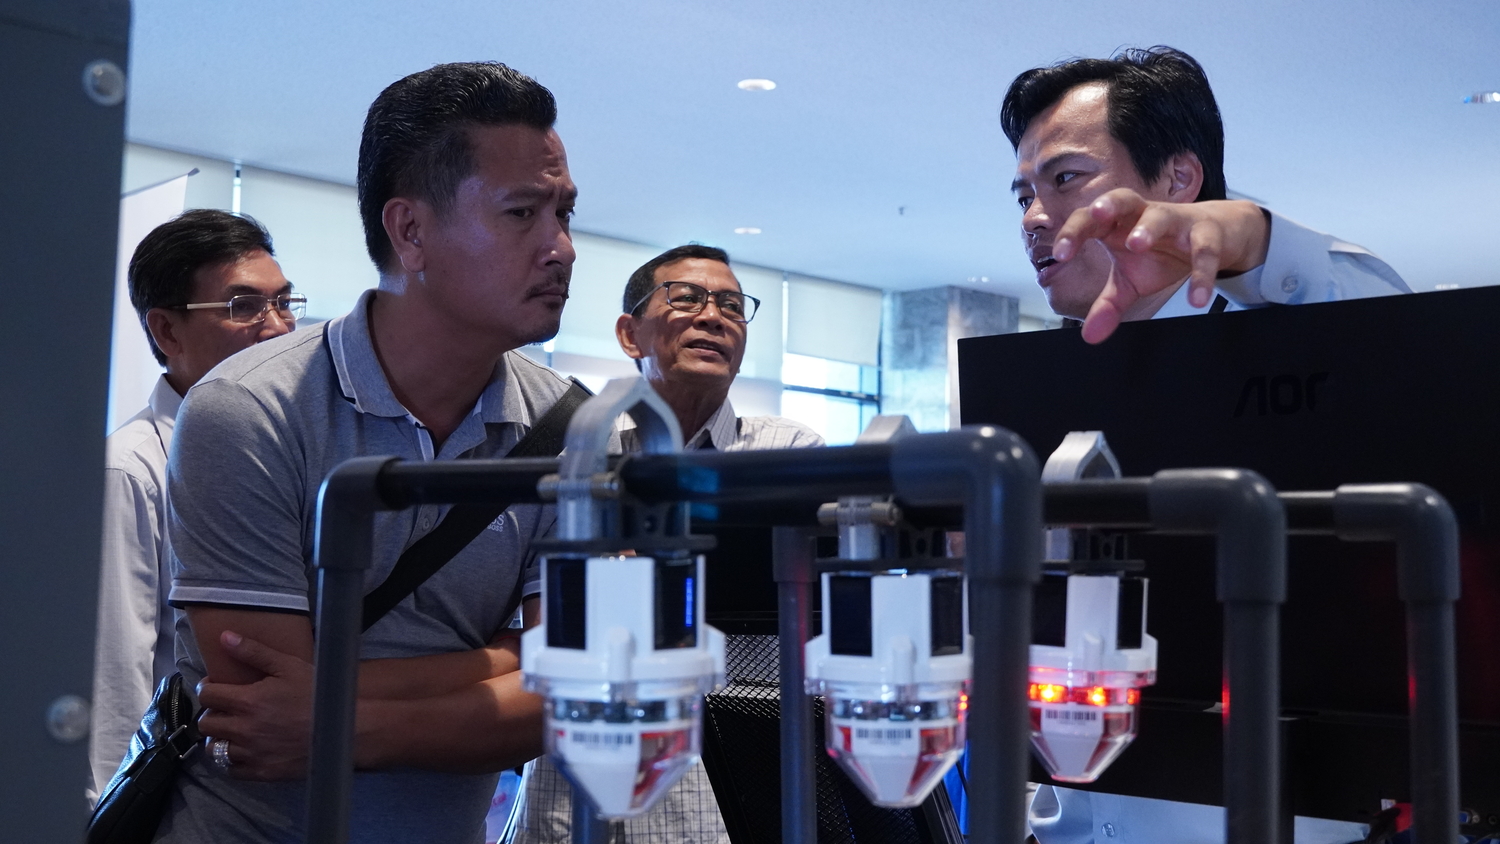 Sales manager informing booth visitor about DRC010 solution